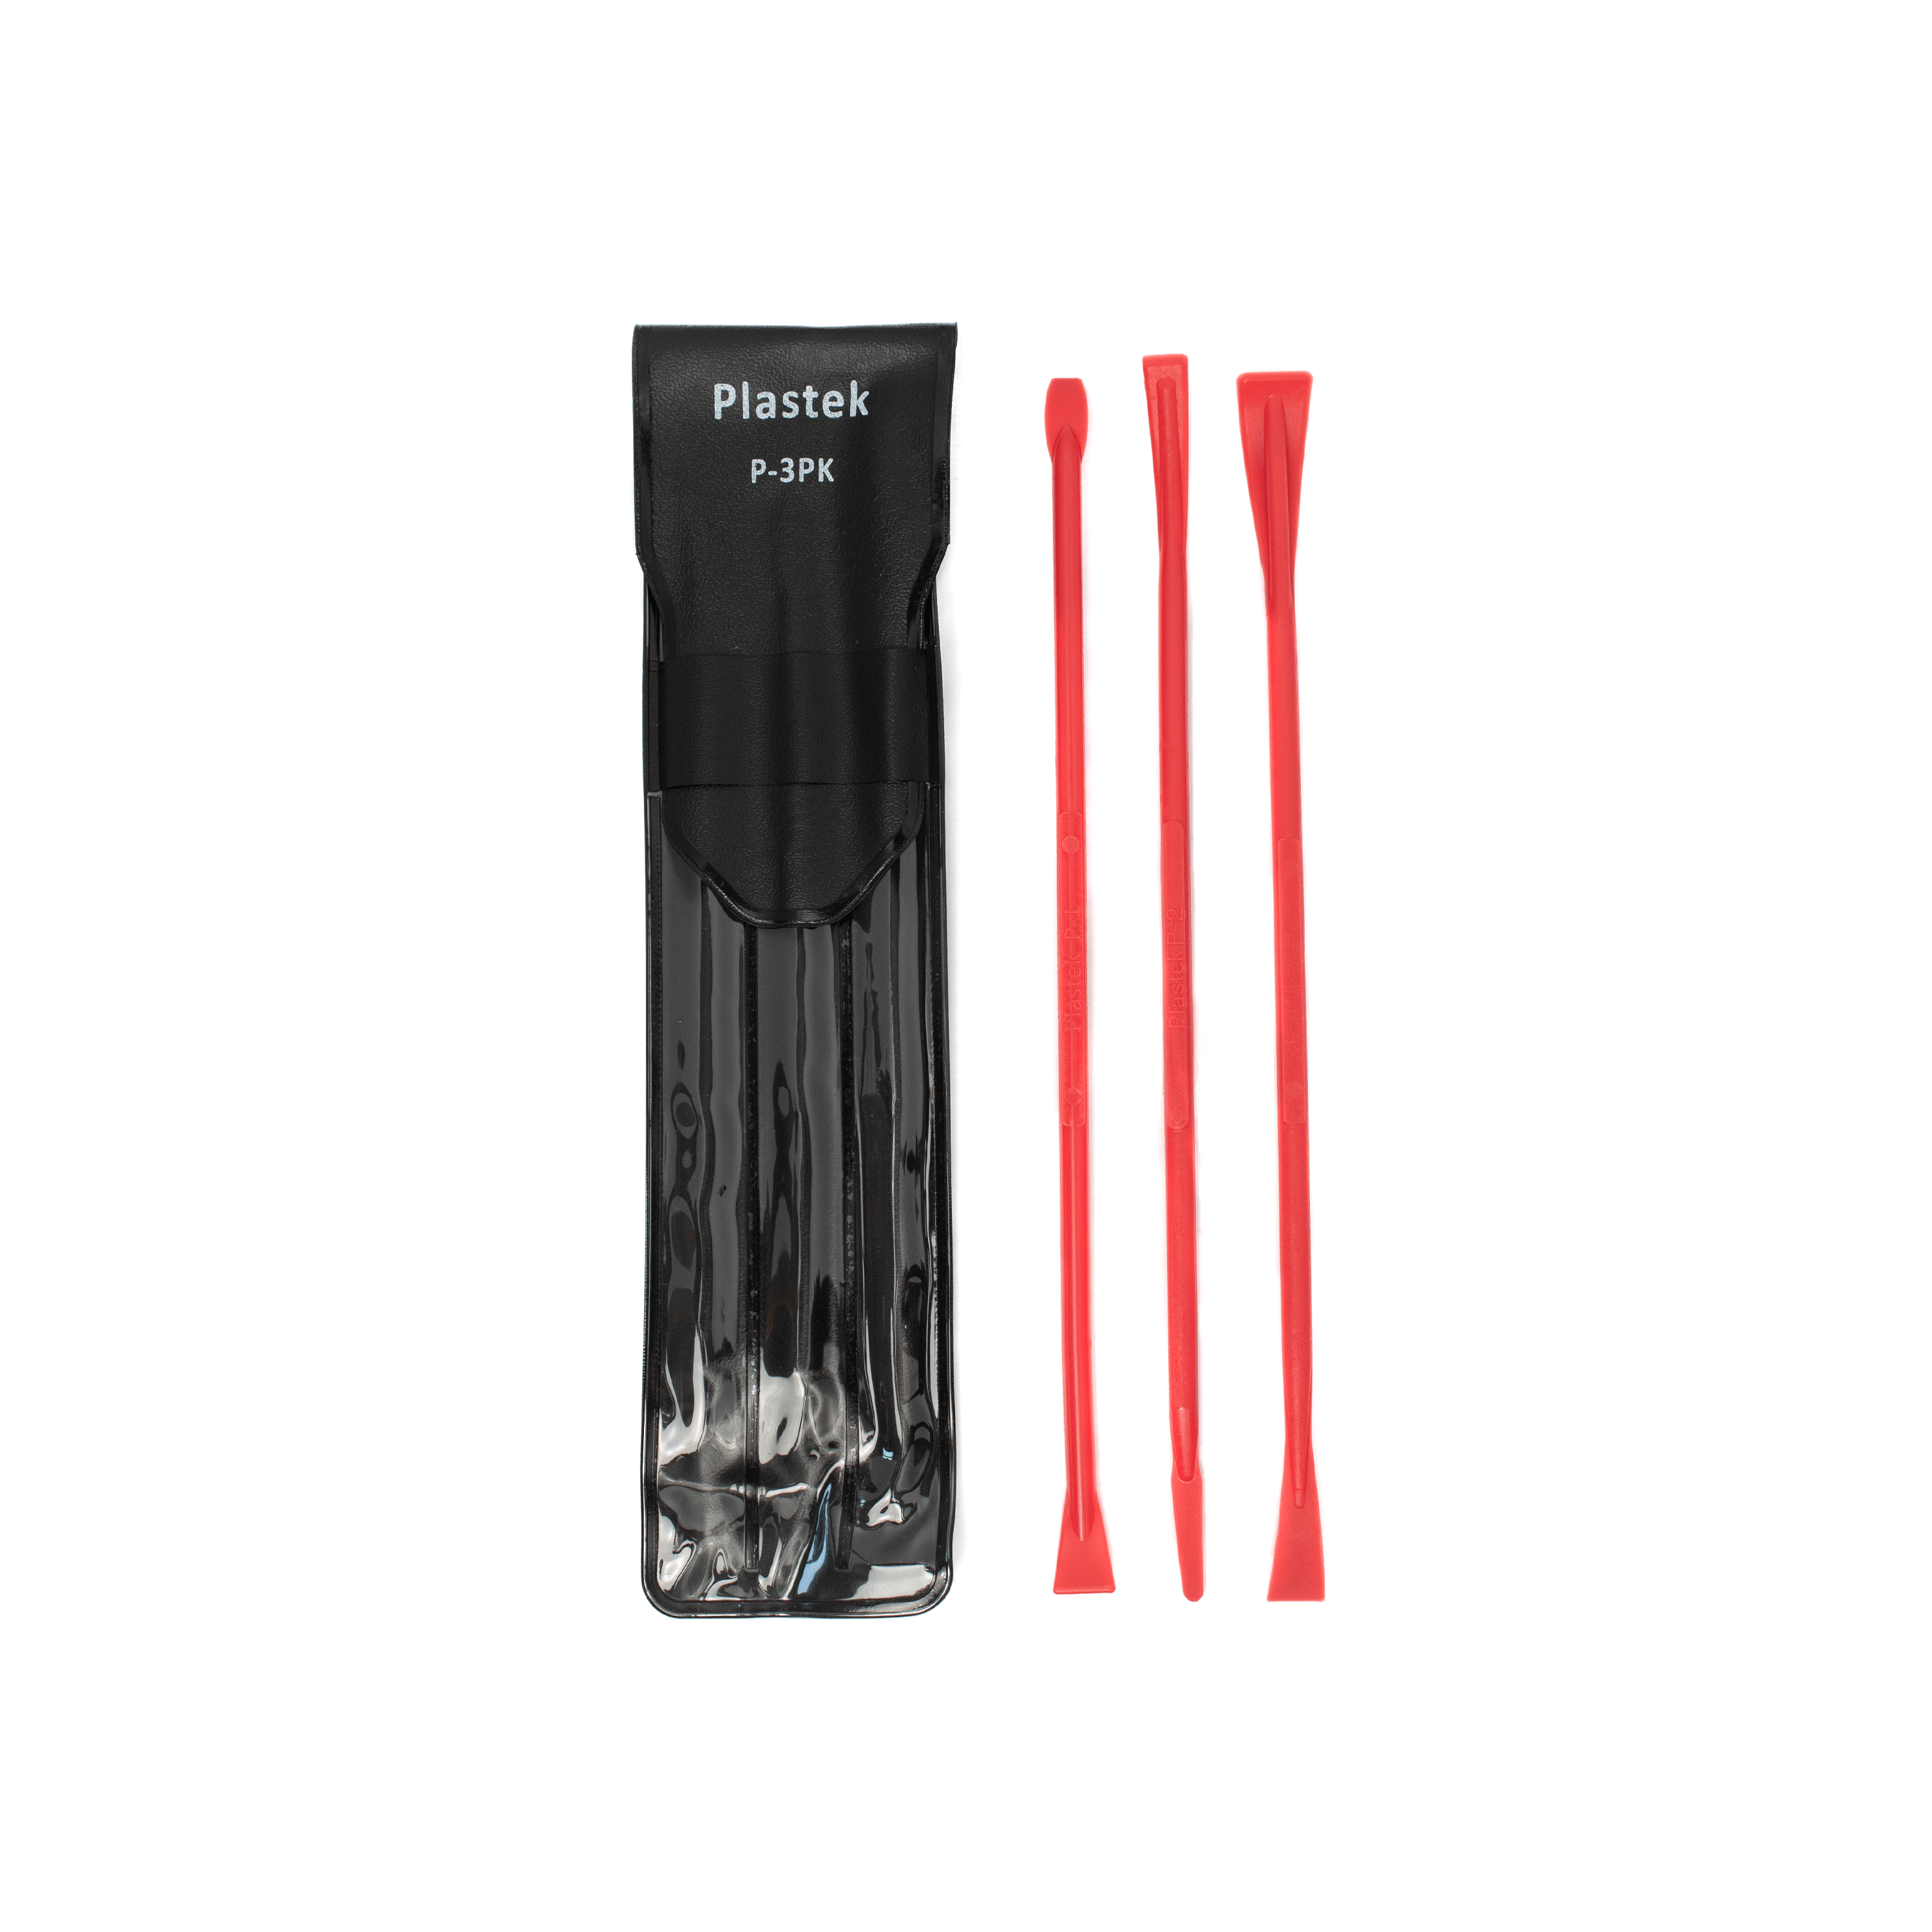 Top view of Red 3-Pack Spatula Kit with all three spatulas outside the kit which includes Crew Tool's #1, #2, and #3 spatulas.